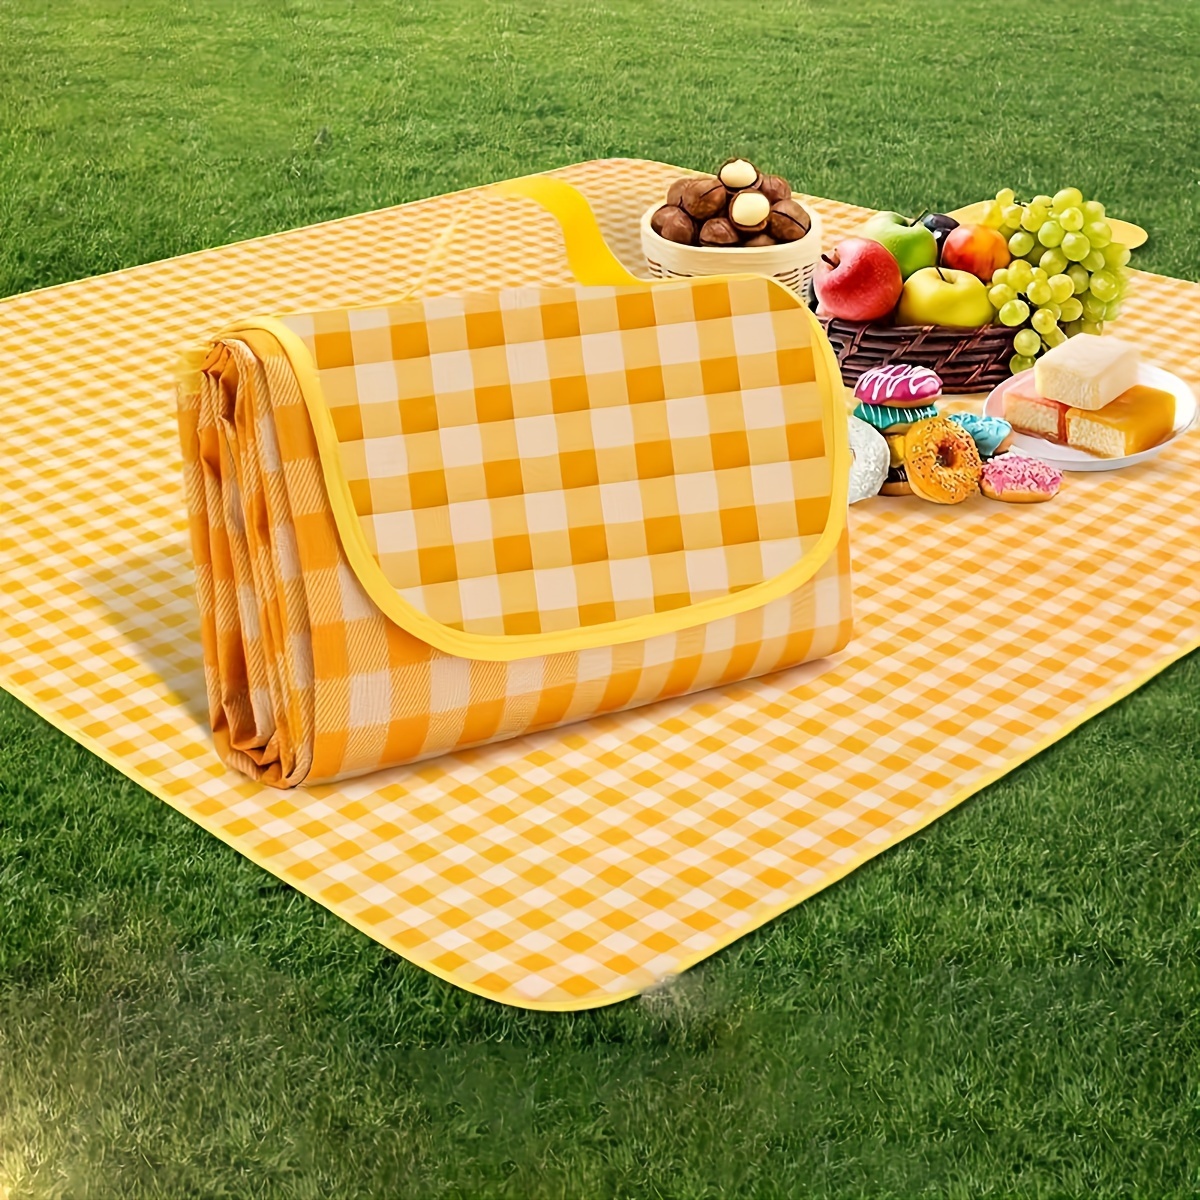 

Outdoor Picnic Blanket - Machine Washable, Stain Resistant, Braided Weave, Polyester Backing, Moisture-proof Tent Floor Mat For Beach, Camping, And Spring Trips